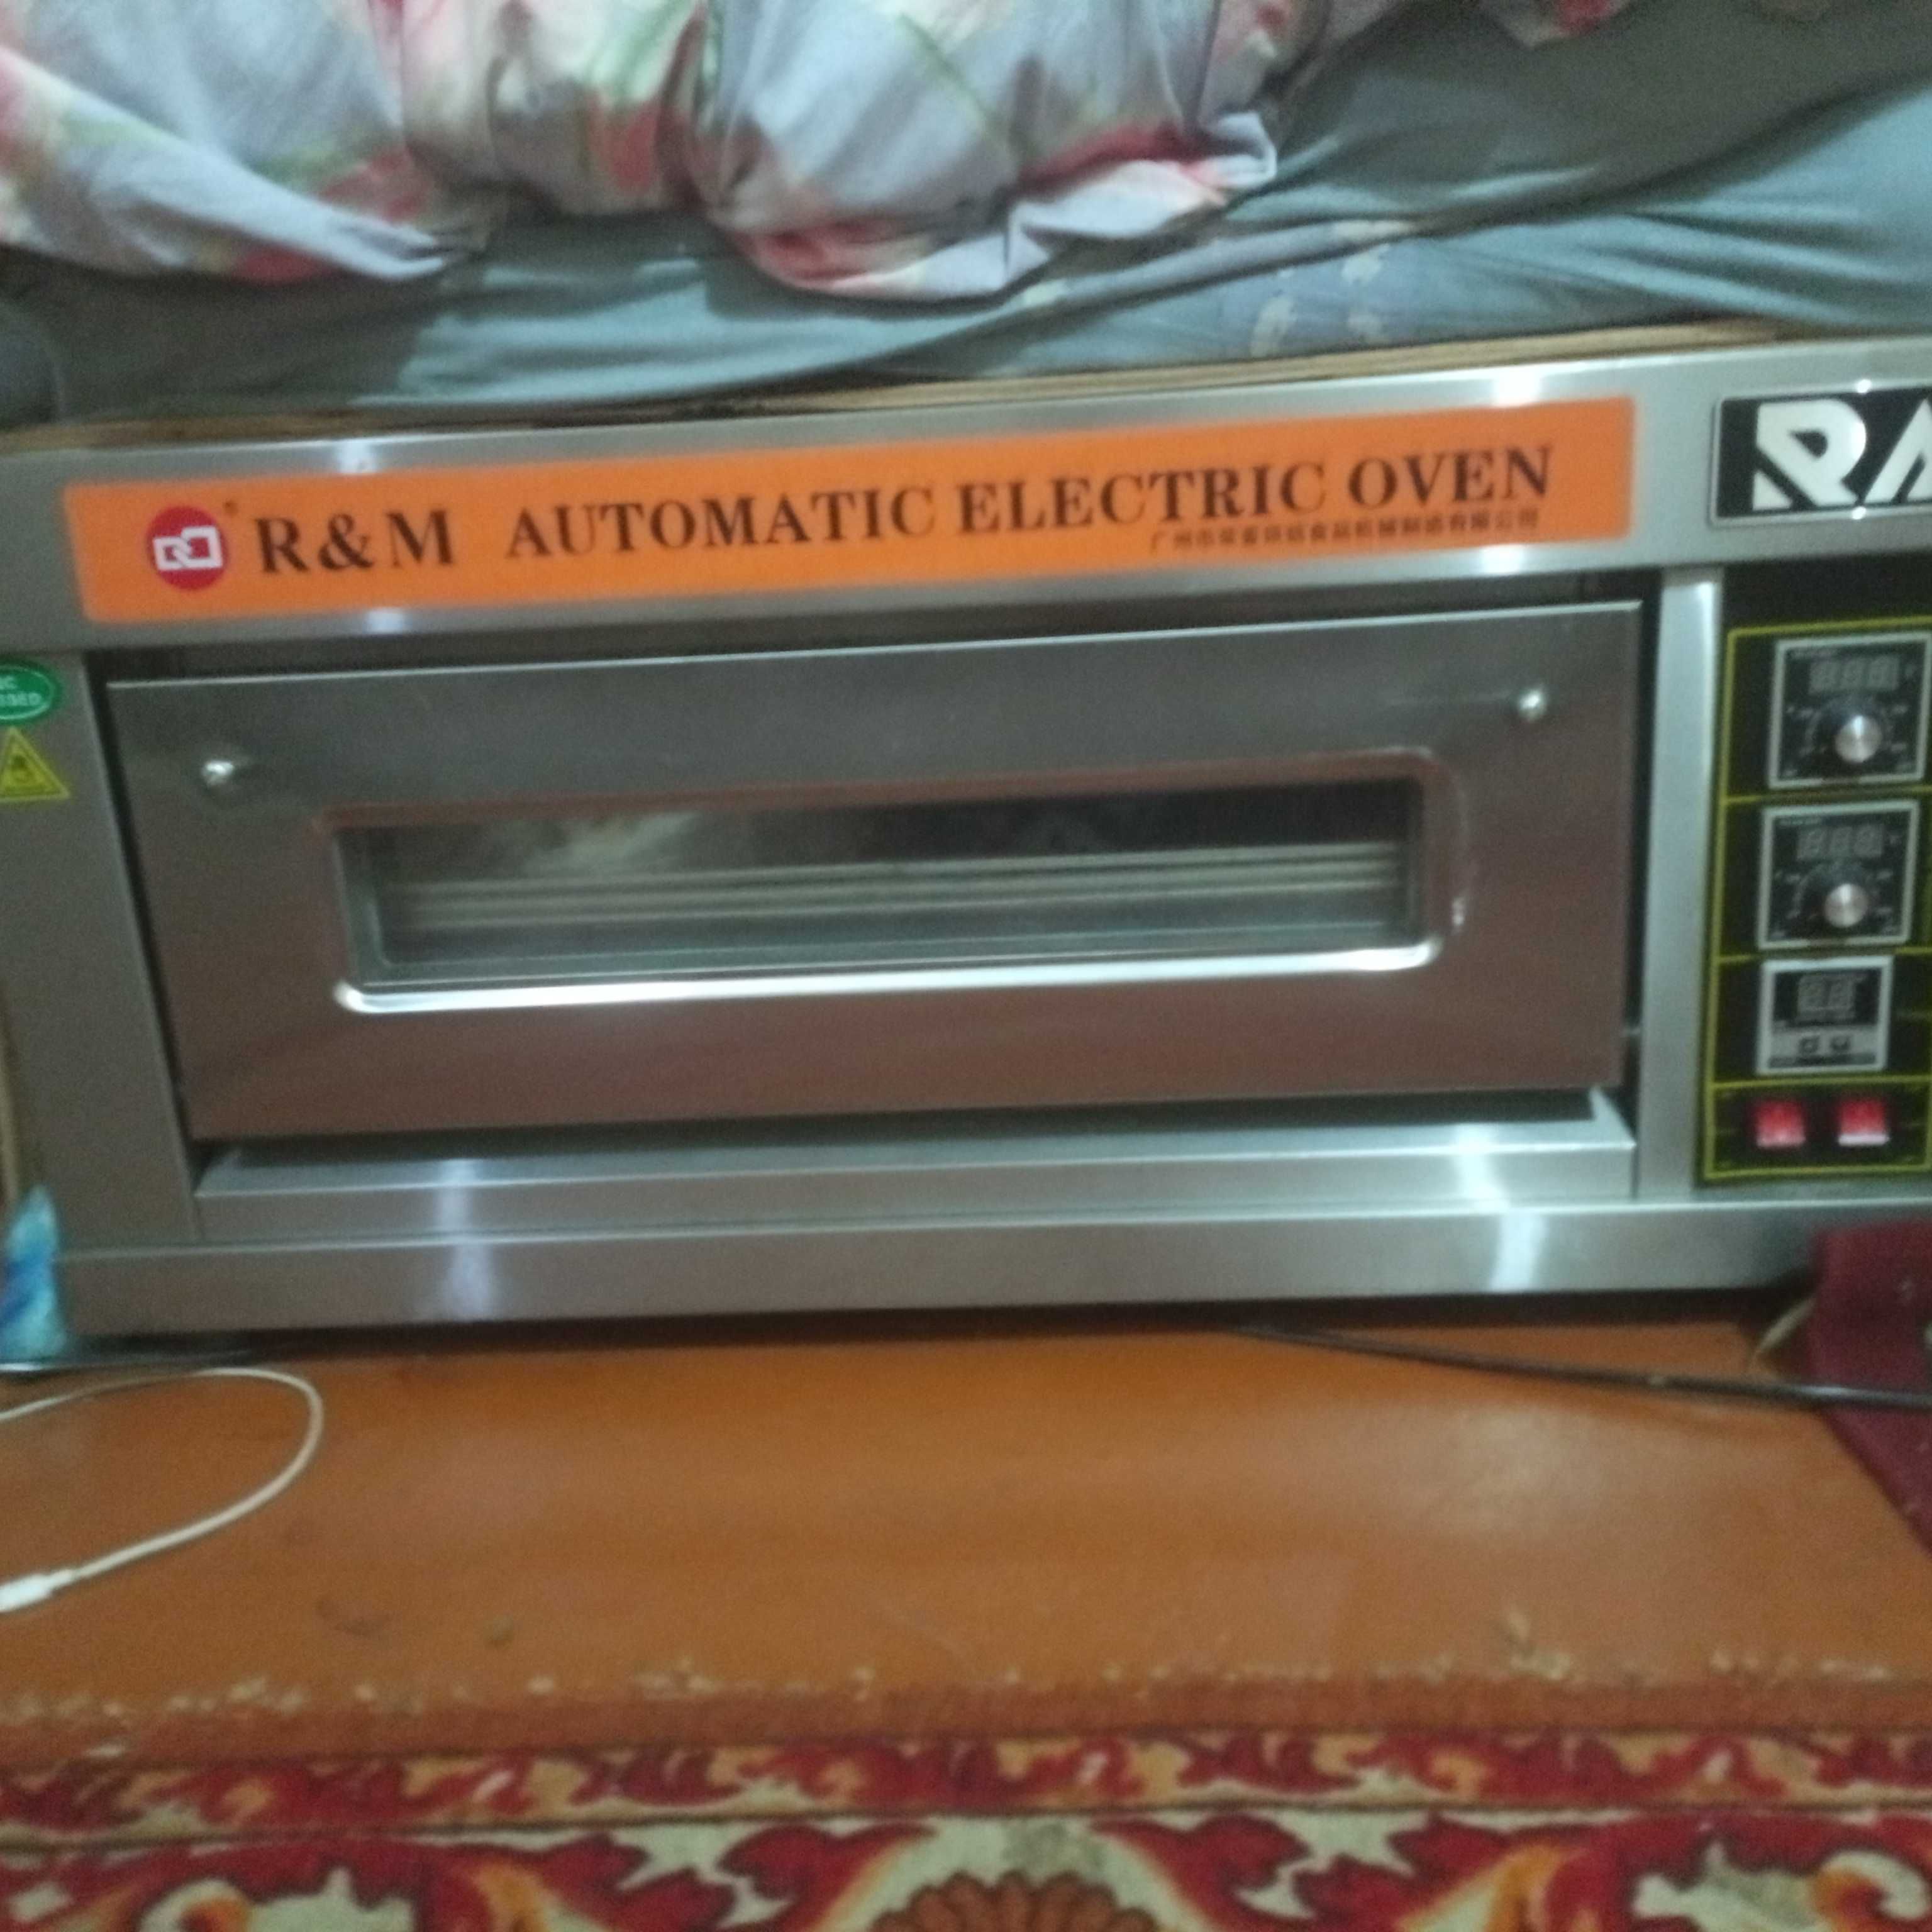 R&M Automatic electric oven